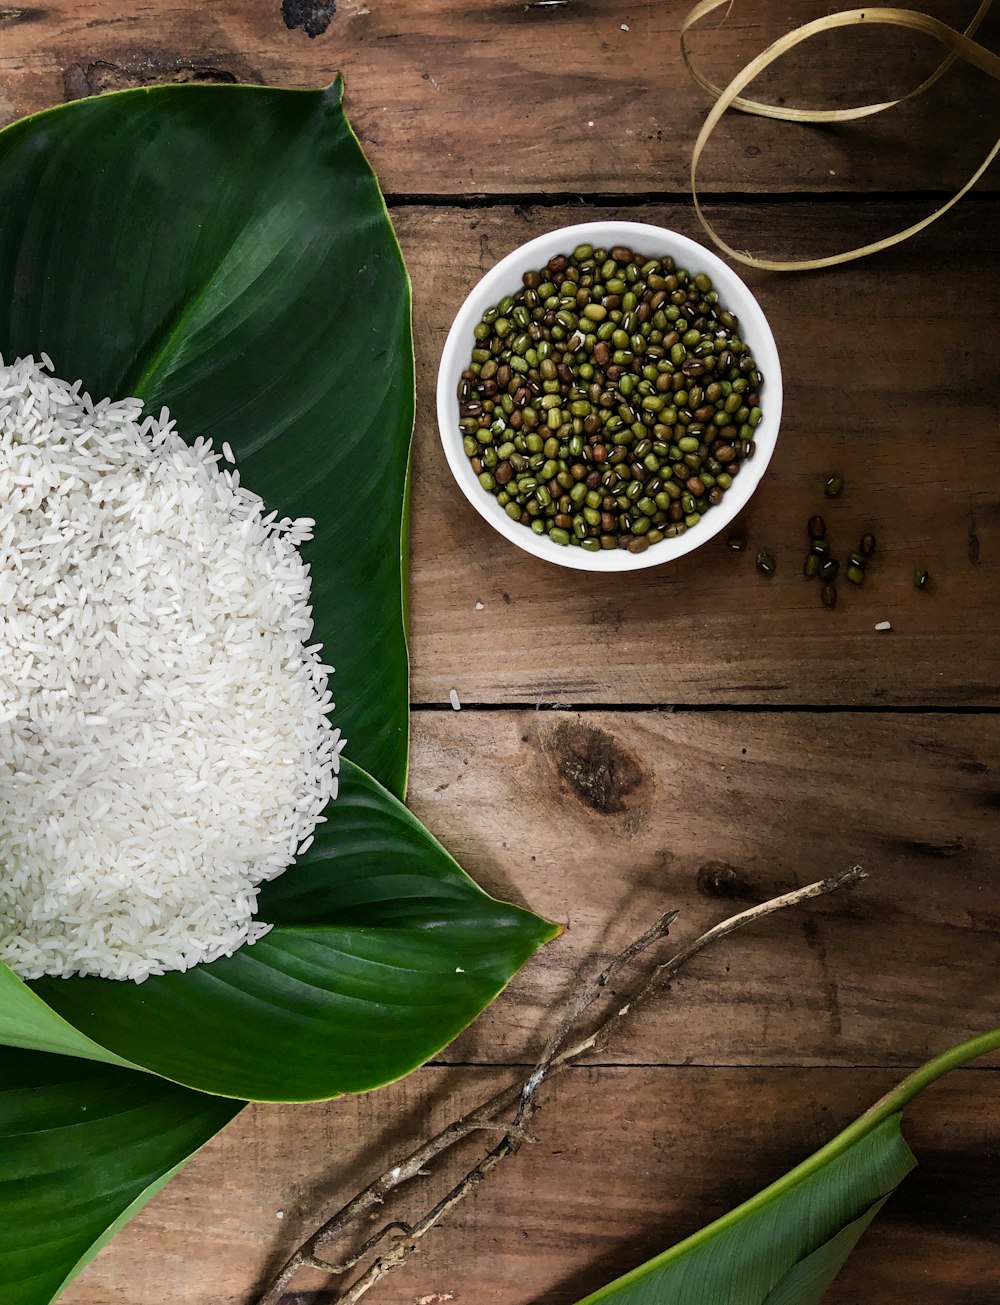 rice in green leaf beside bowl of seeds